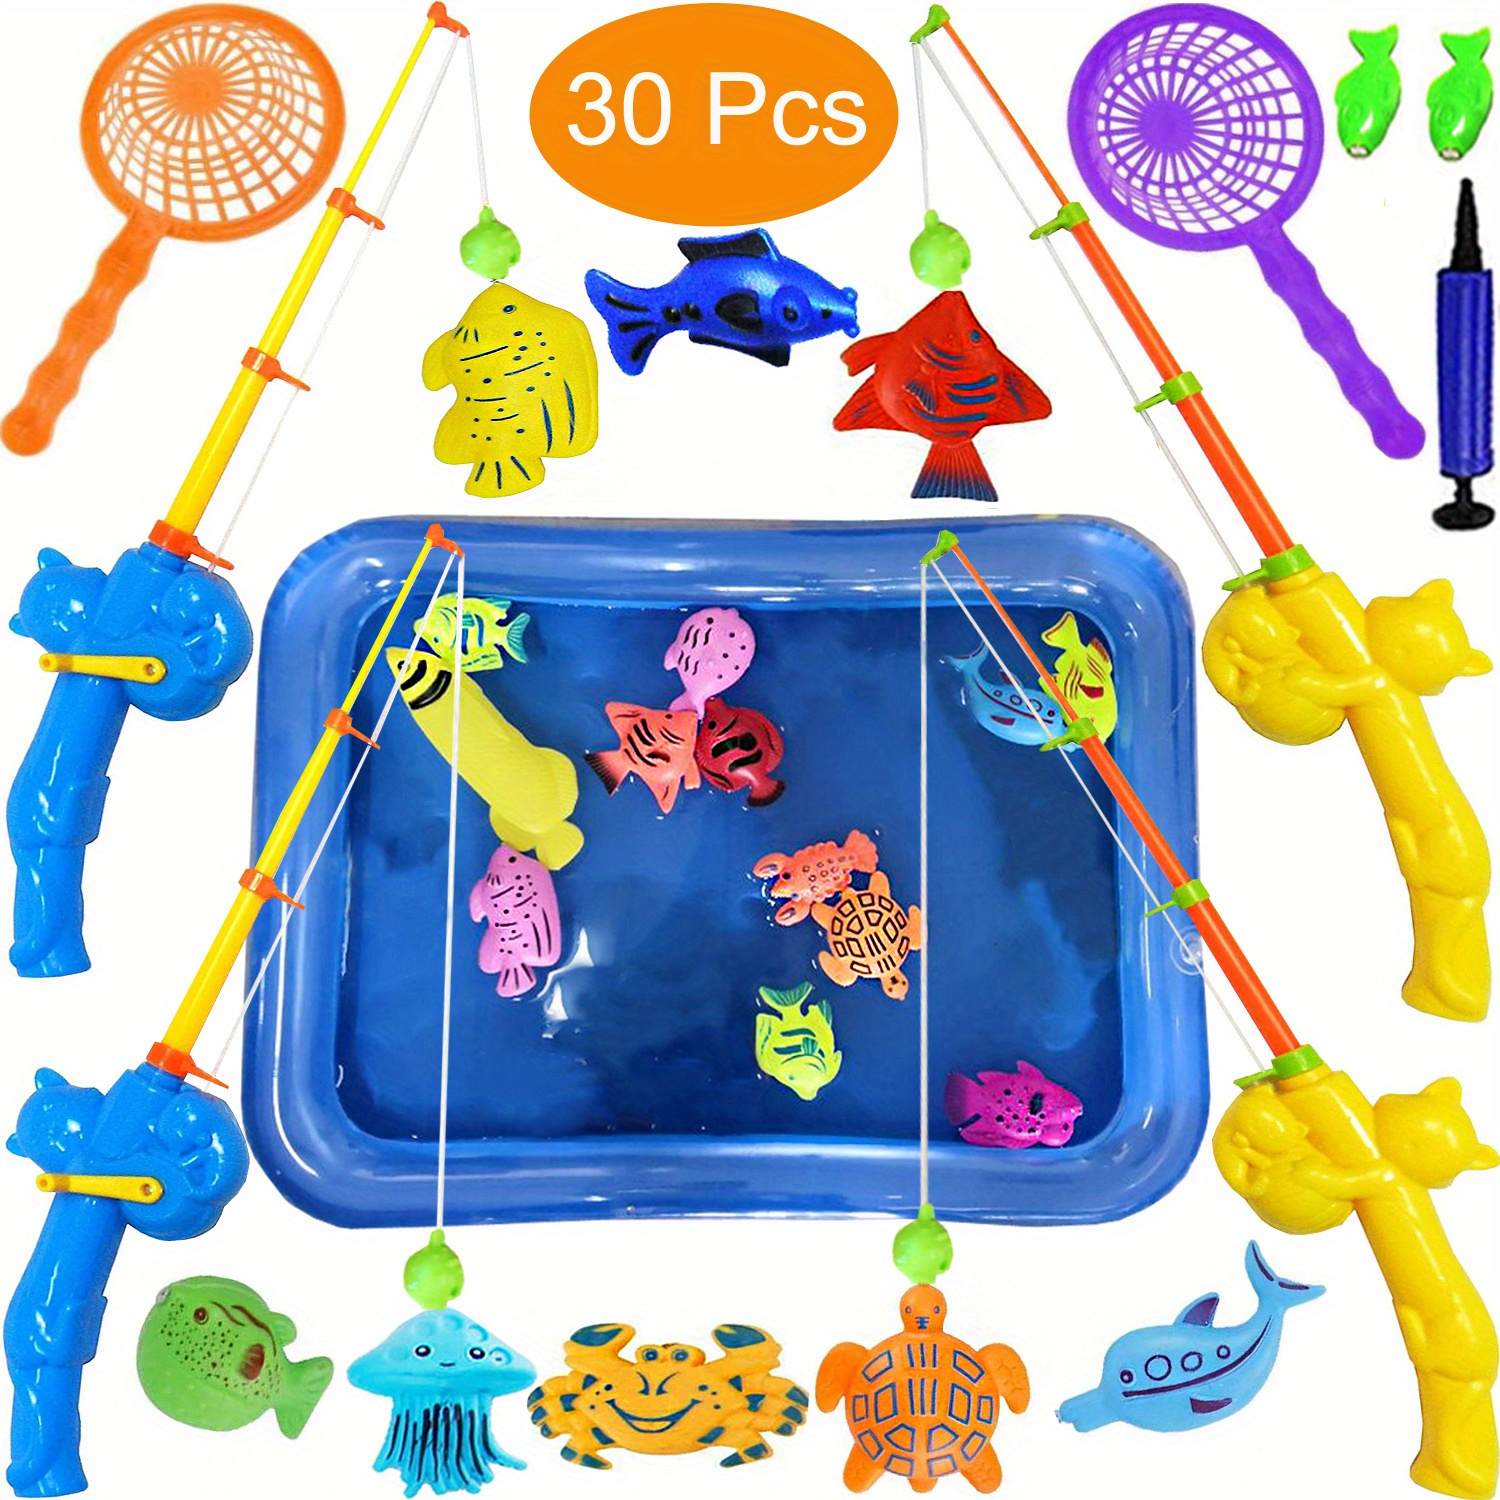 Set Of 22 Magnetic Fishing Pool Toys Game For Kids - Water Table Bathtub  Kiddie Party Toy Ocean Sea Animals Gifts Age 3 4 5 6 Year Old